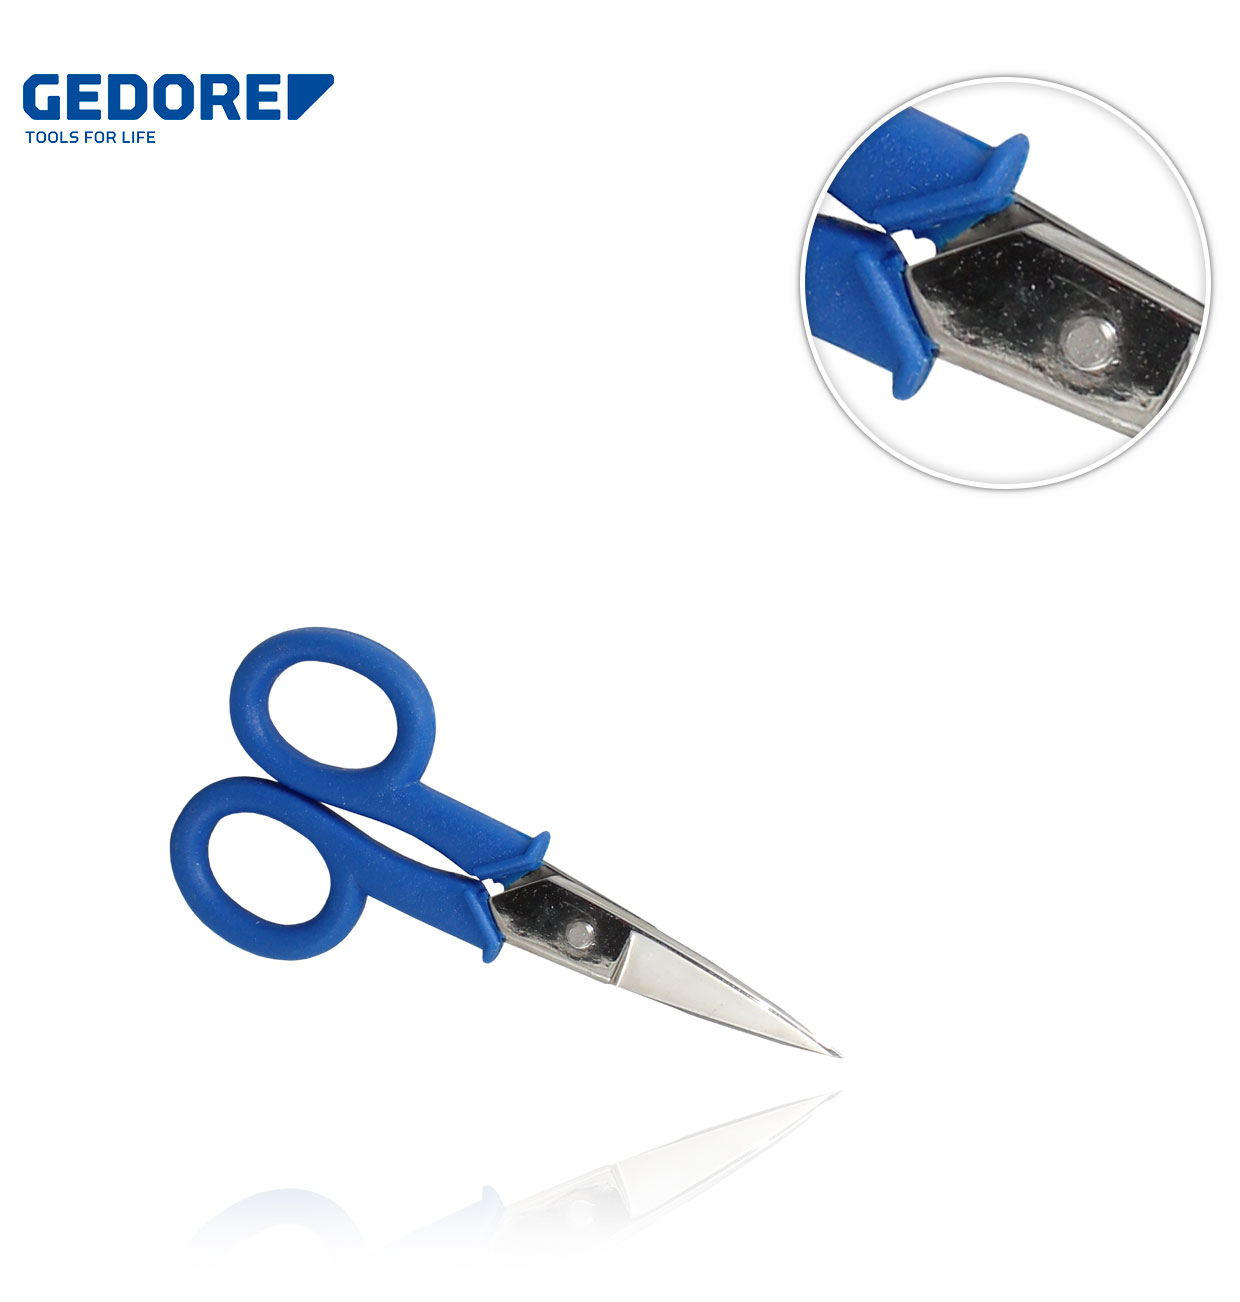 GEDORE UNIVERSAL SCISSORS WITH GROOVE